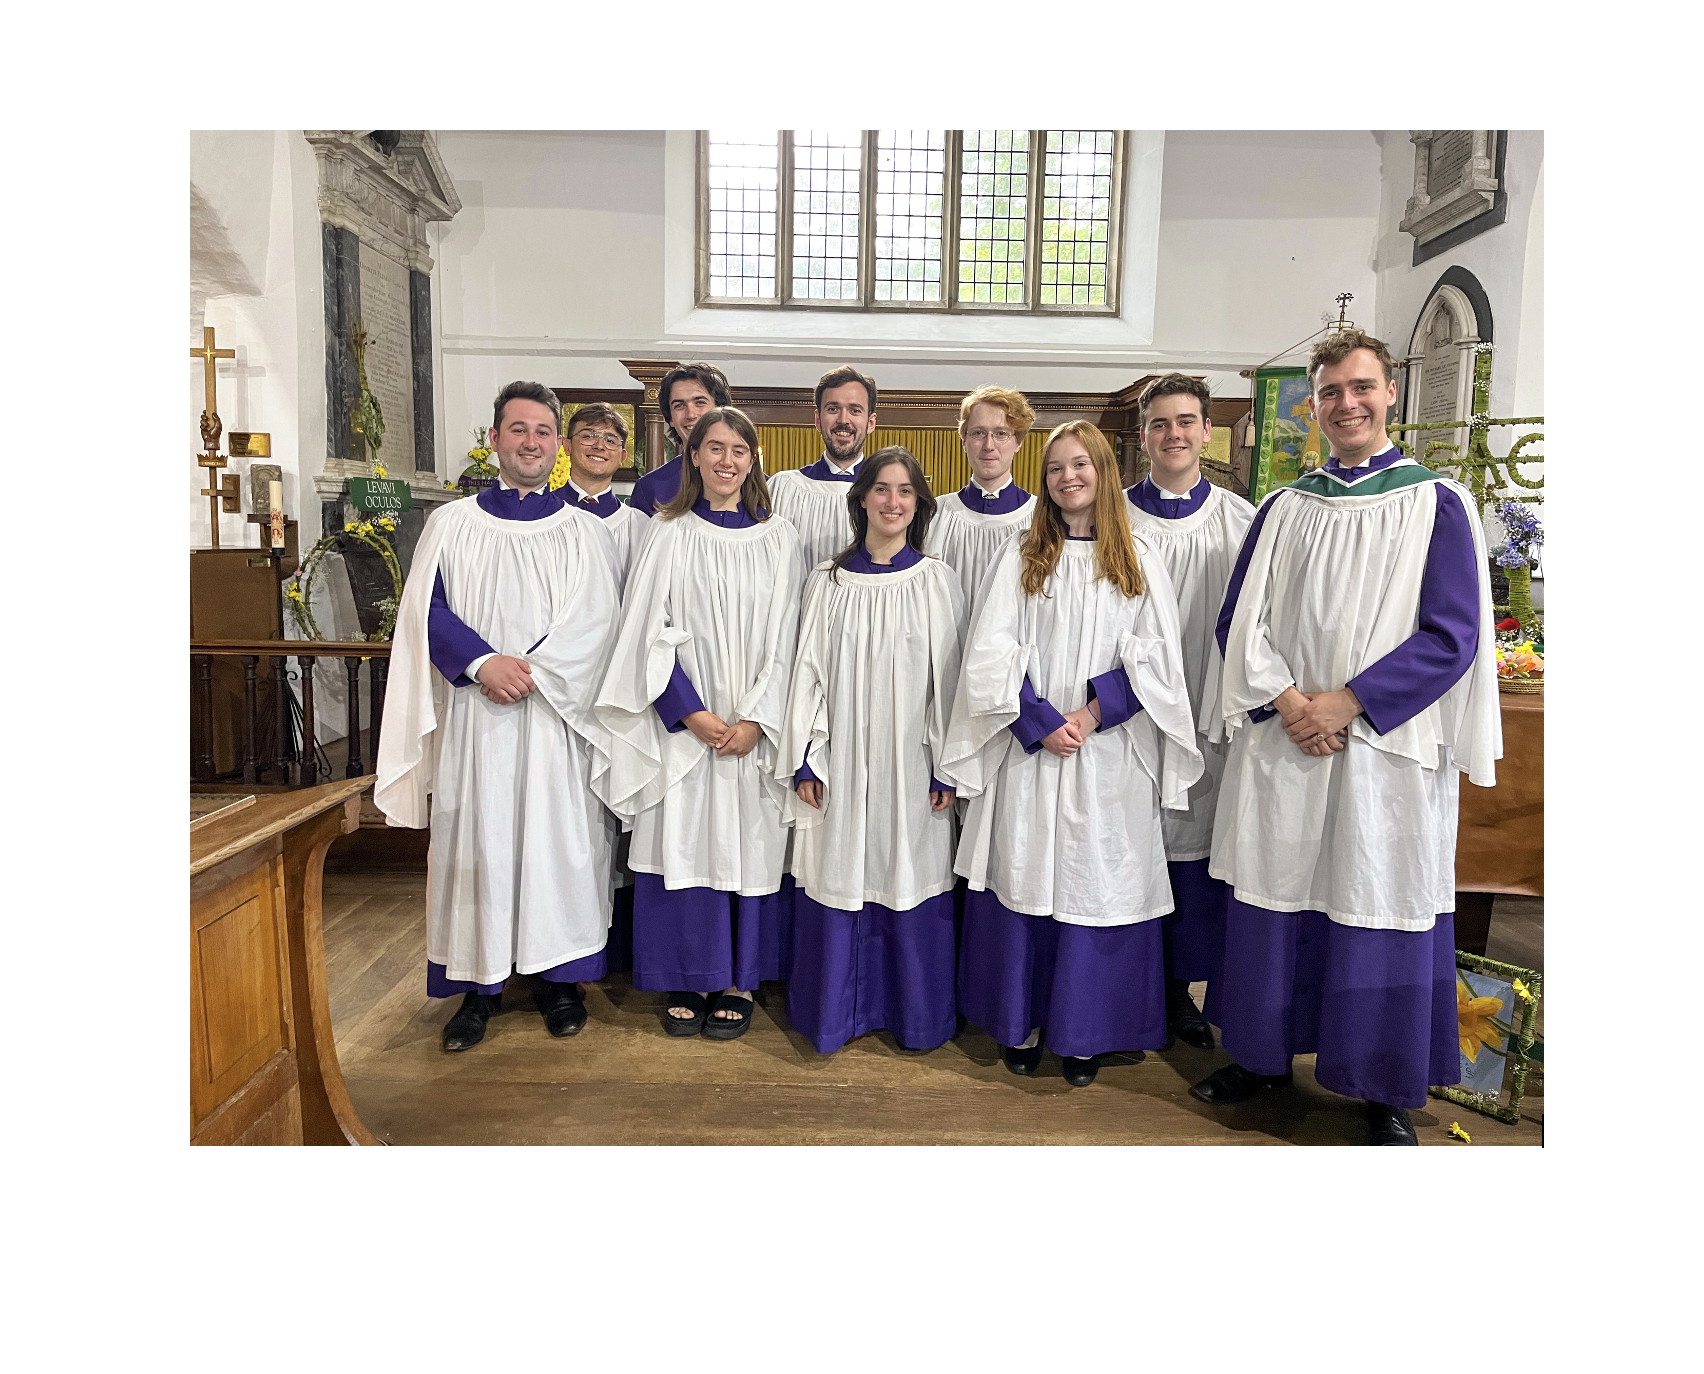 A group of singers from the choir dressed in their robes (white over purple)